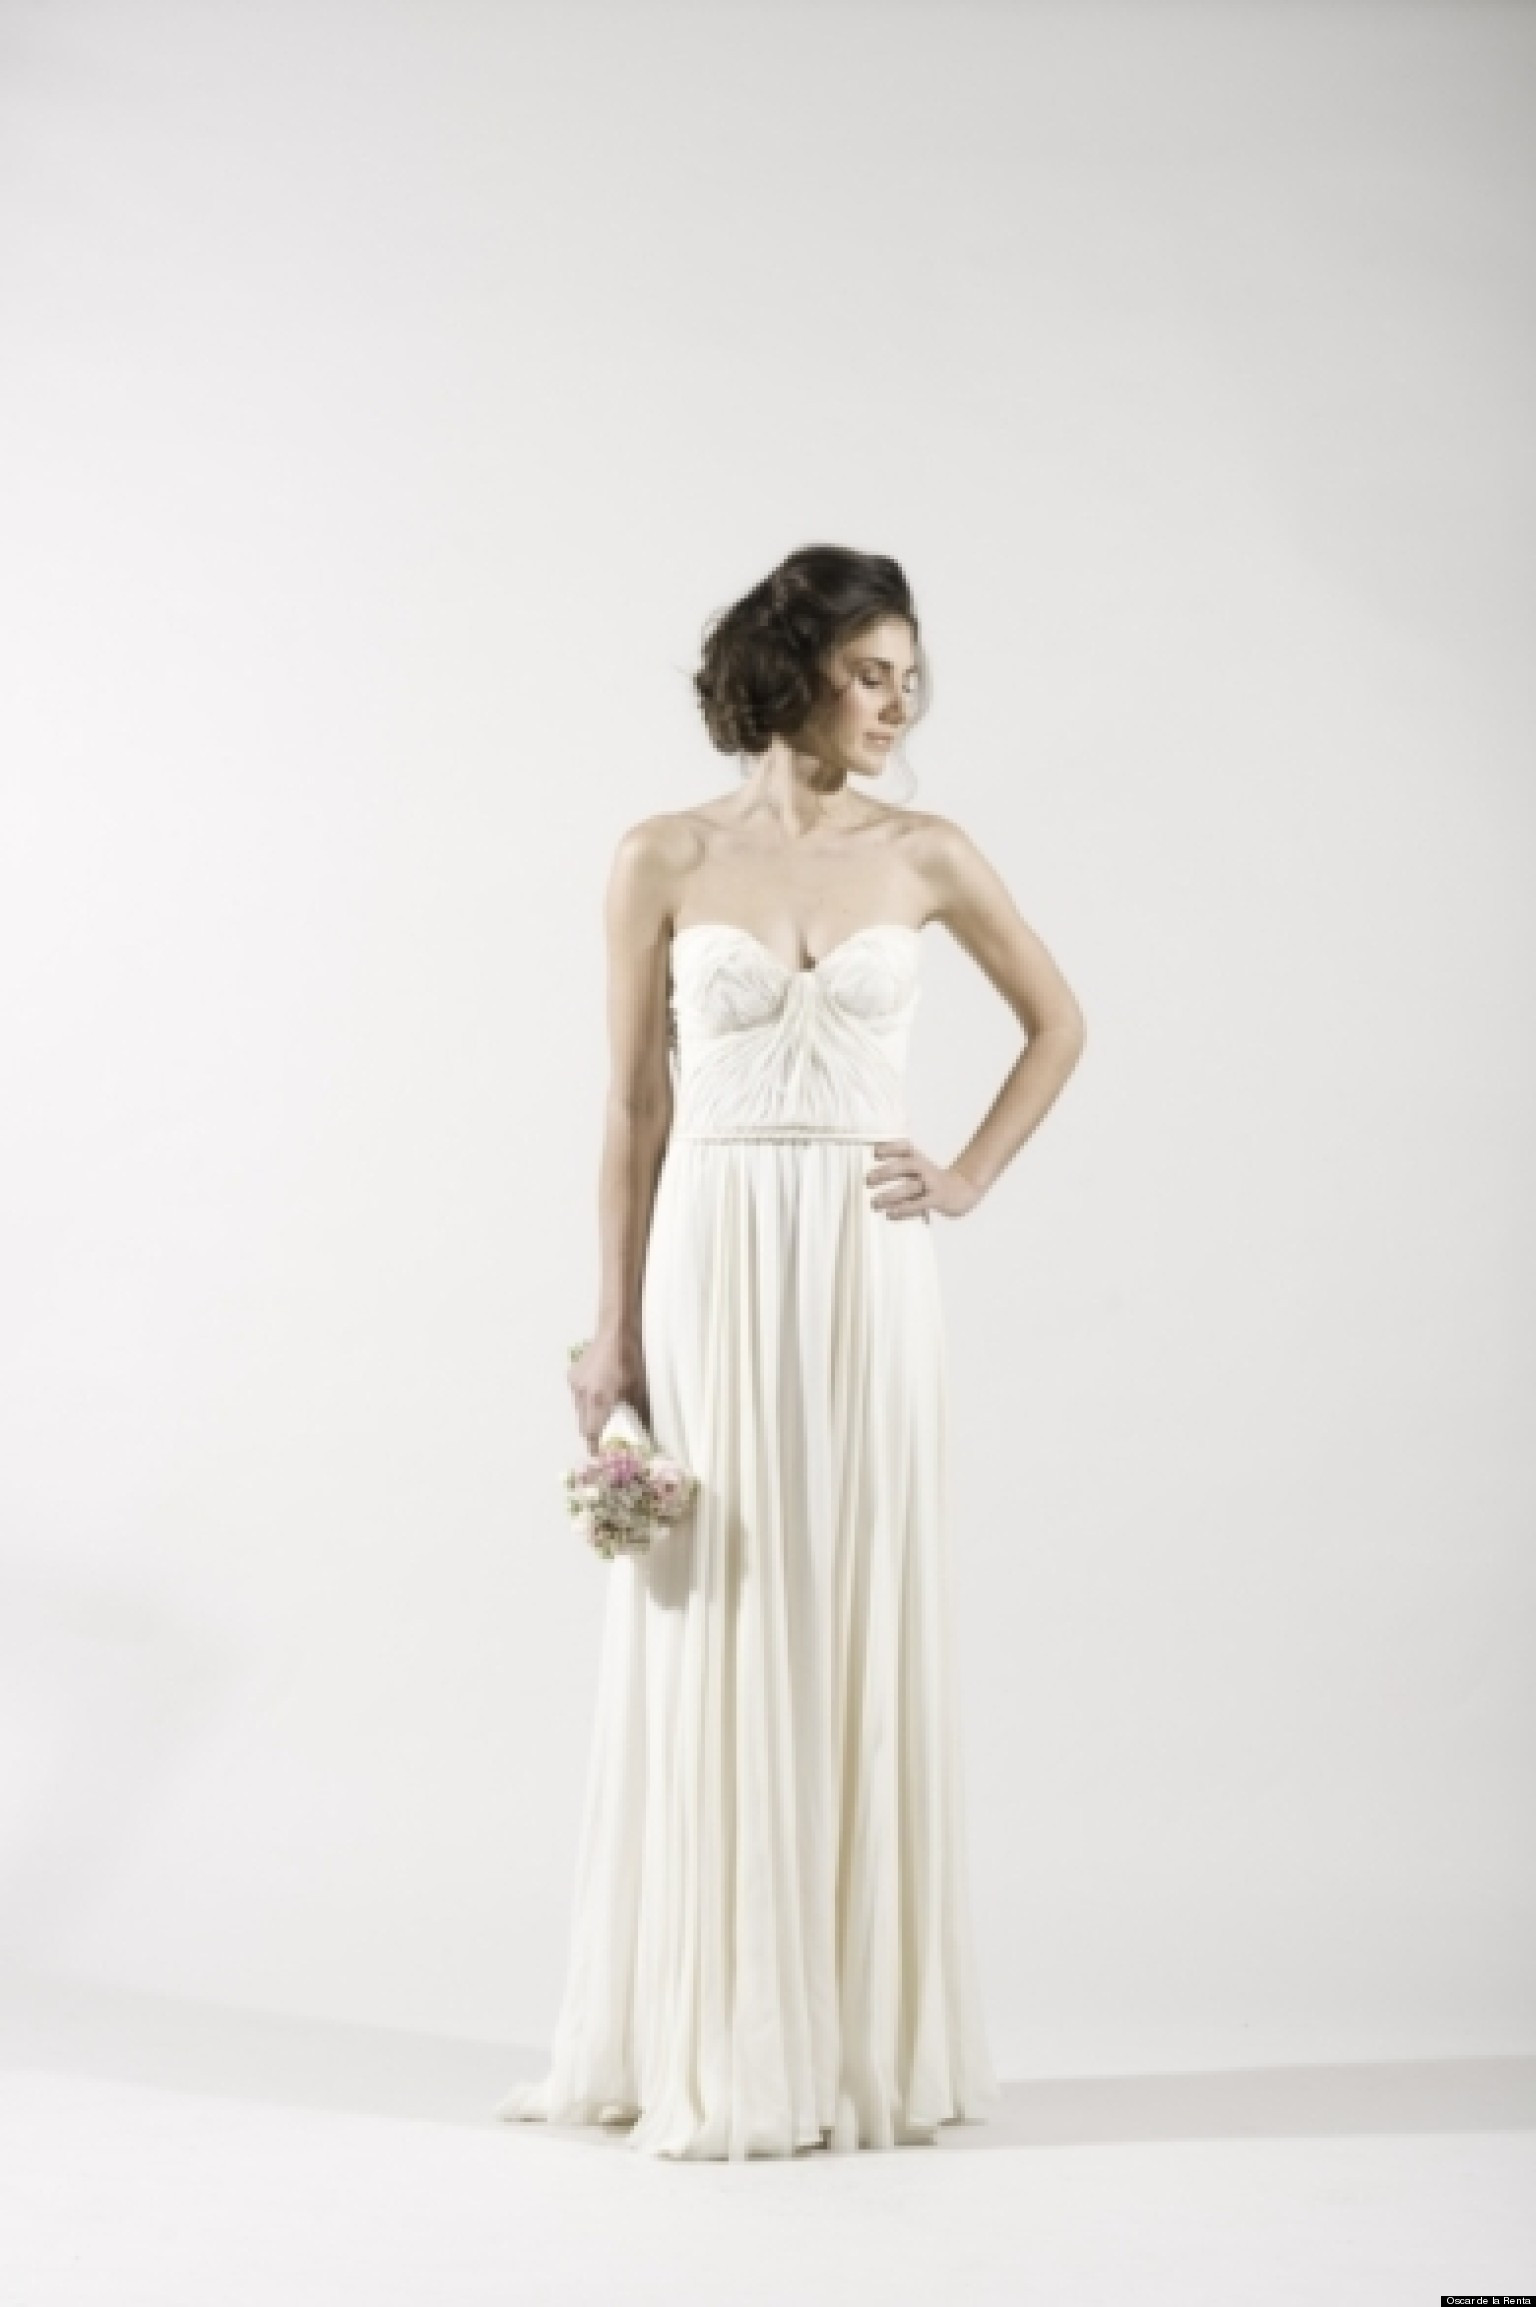 Grecian Wedding Dresses
 Grecian Wedding Dresses For A Goddess Inspired Look